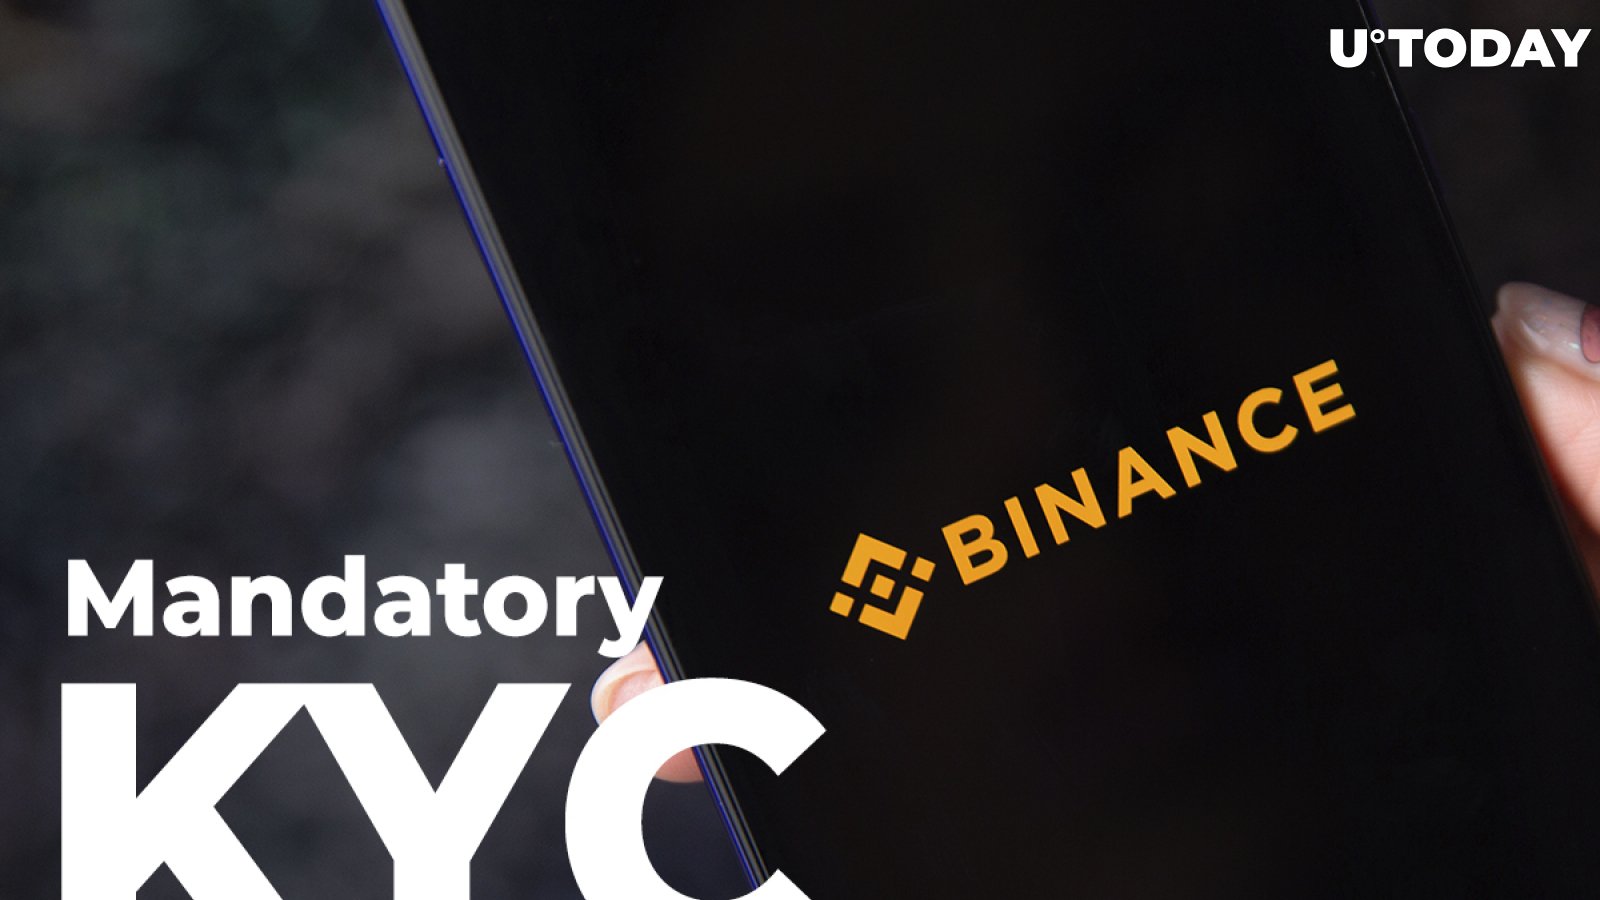 Binance Introduces Mandatory KYC for All Services As It Seeks to Settle Issues with Regulators 